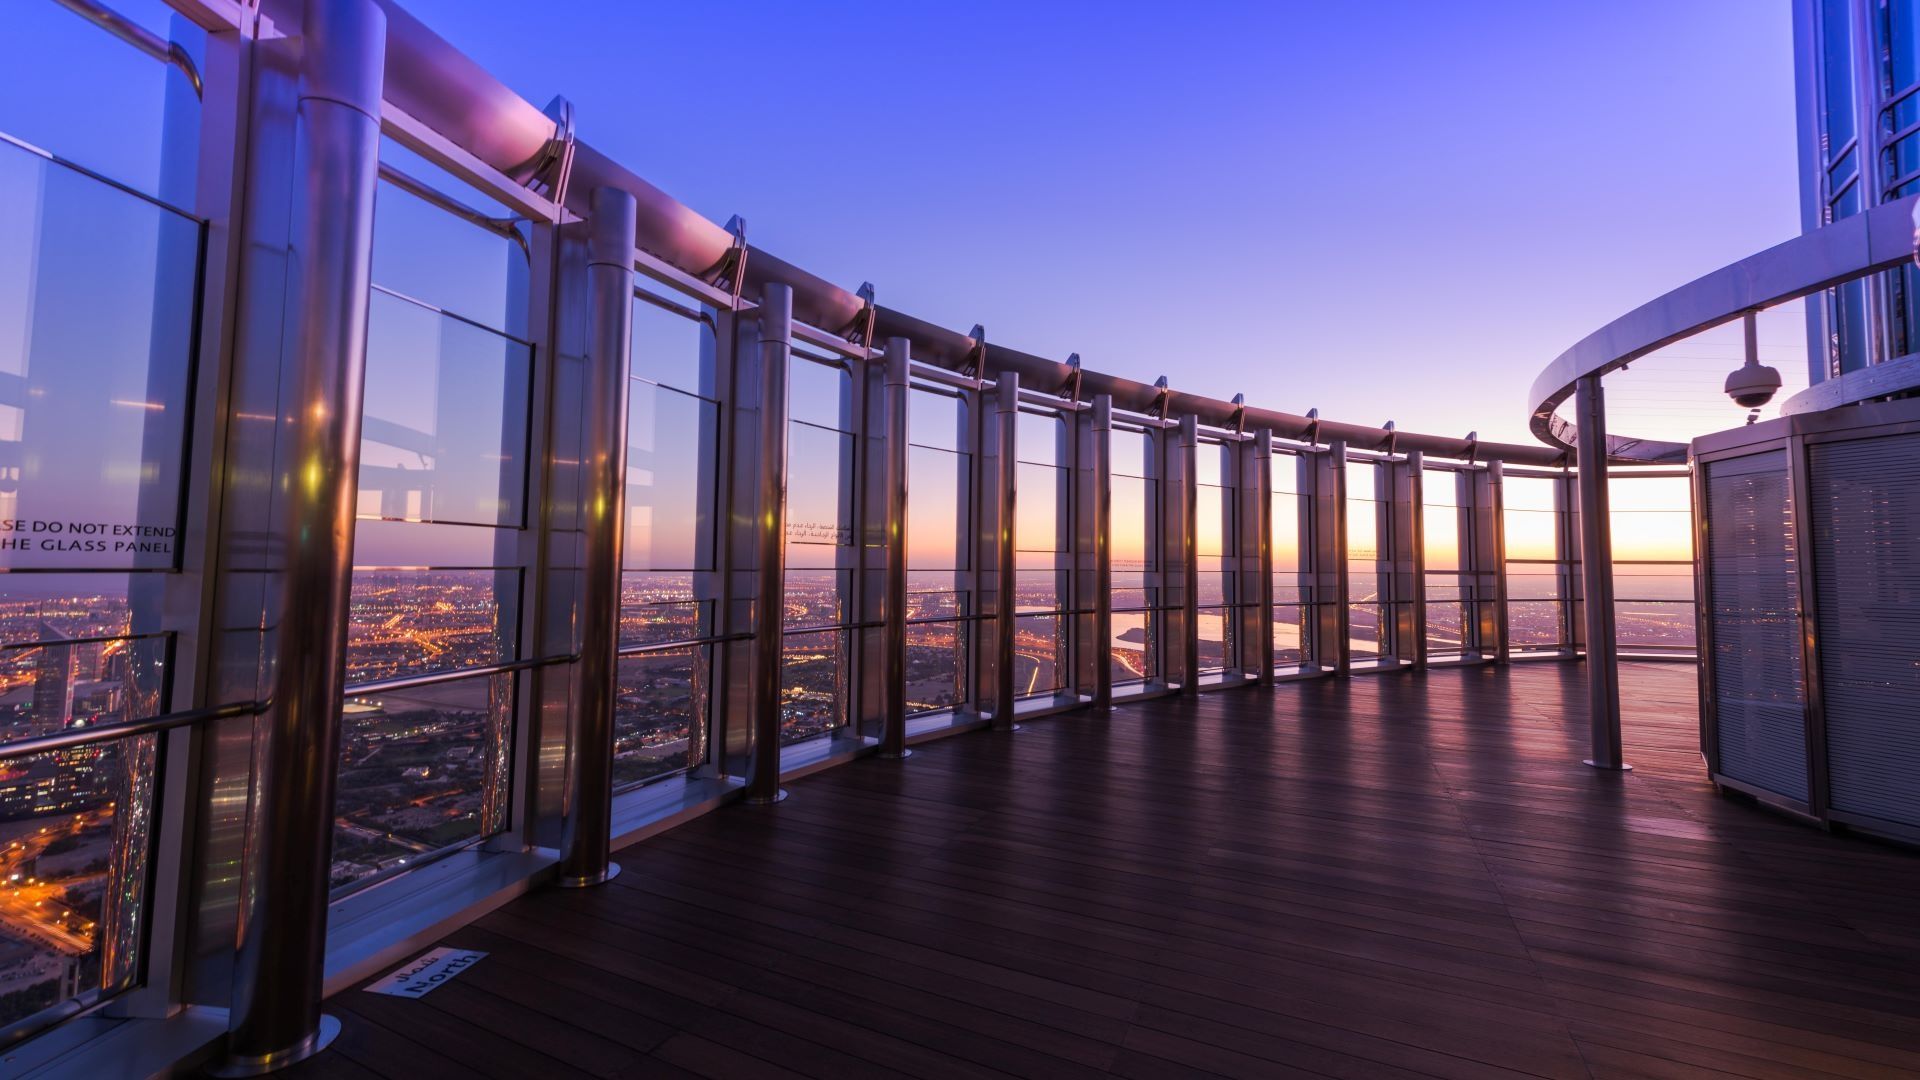 At The Top, Burj Khalifa Level 124 - 125 with Lunch or Dinner at the Burj Club Rooftop Off peak